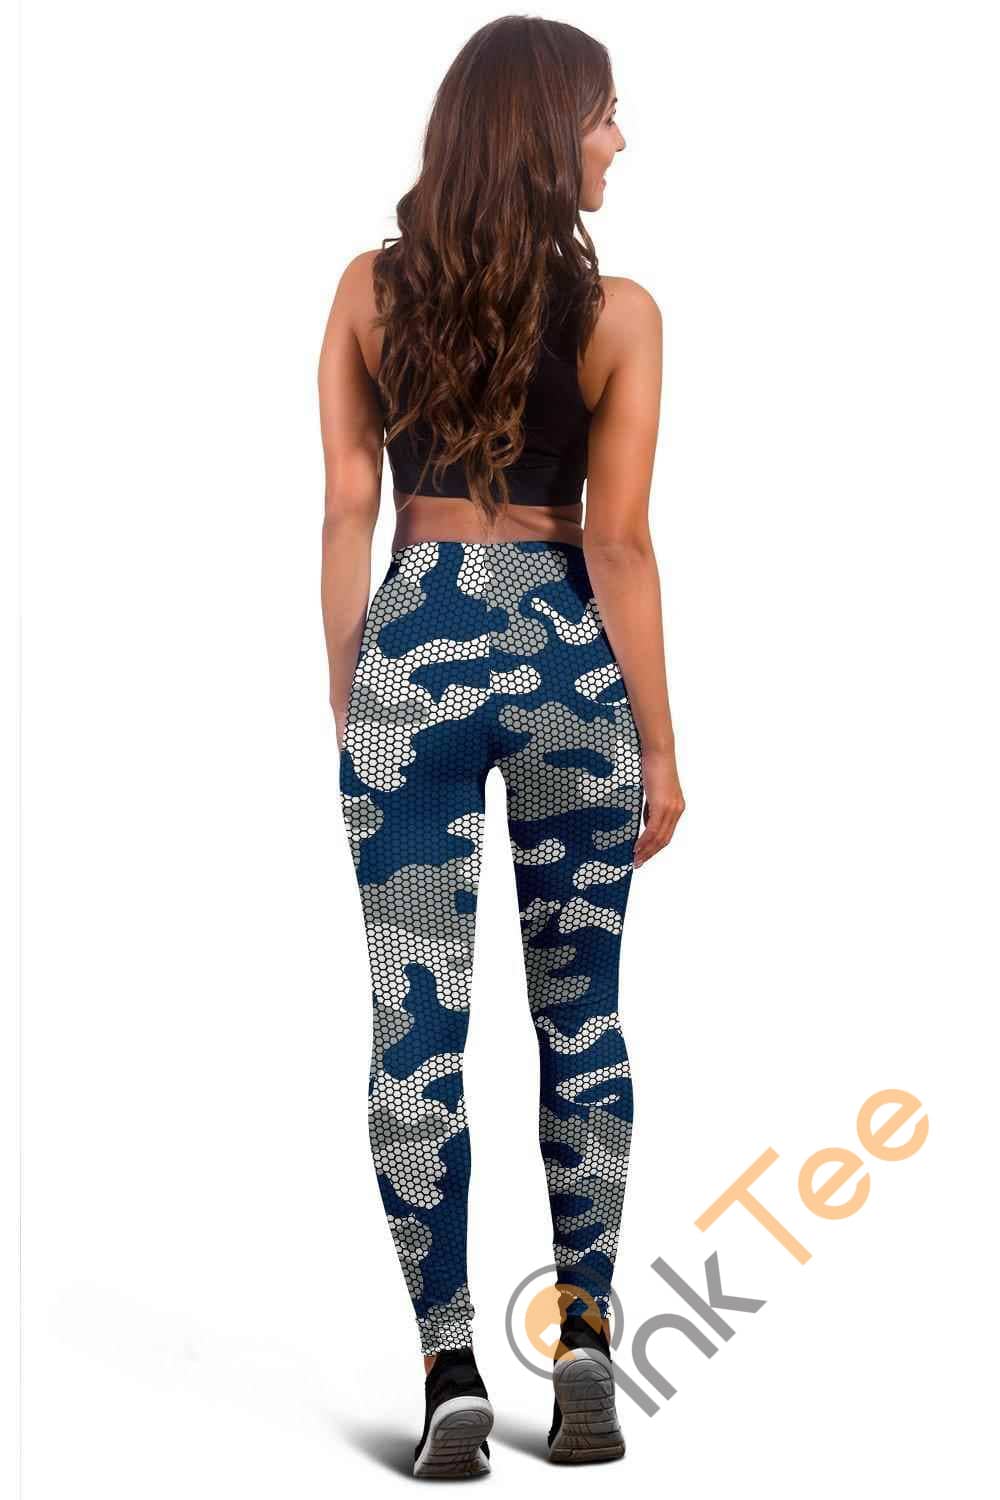 Inktee Store - Indianapolis Colts Inspired Hex Camo 3D All Over Print For Yoga Fitness Fashion Women'S Leggings Image